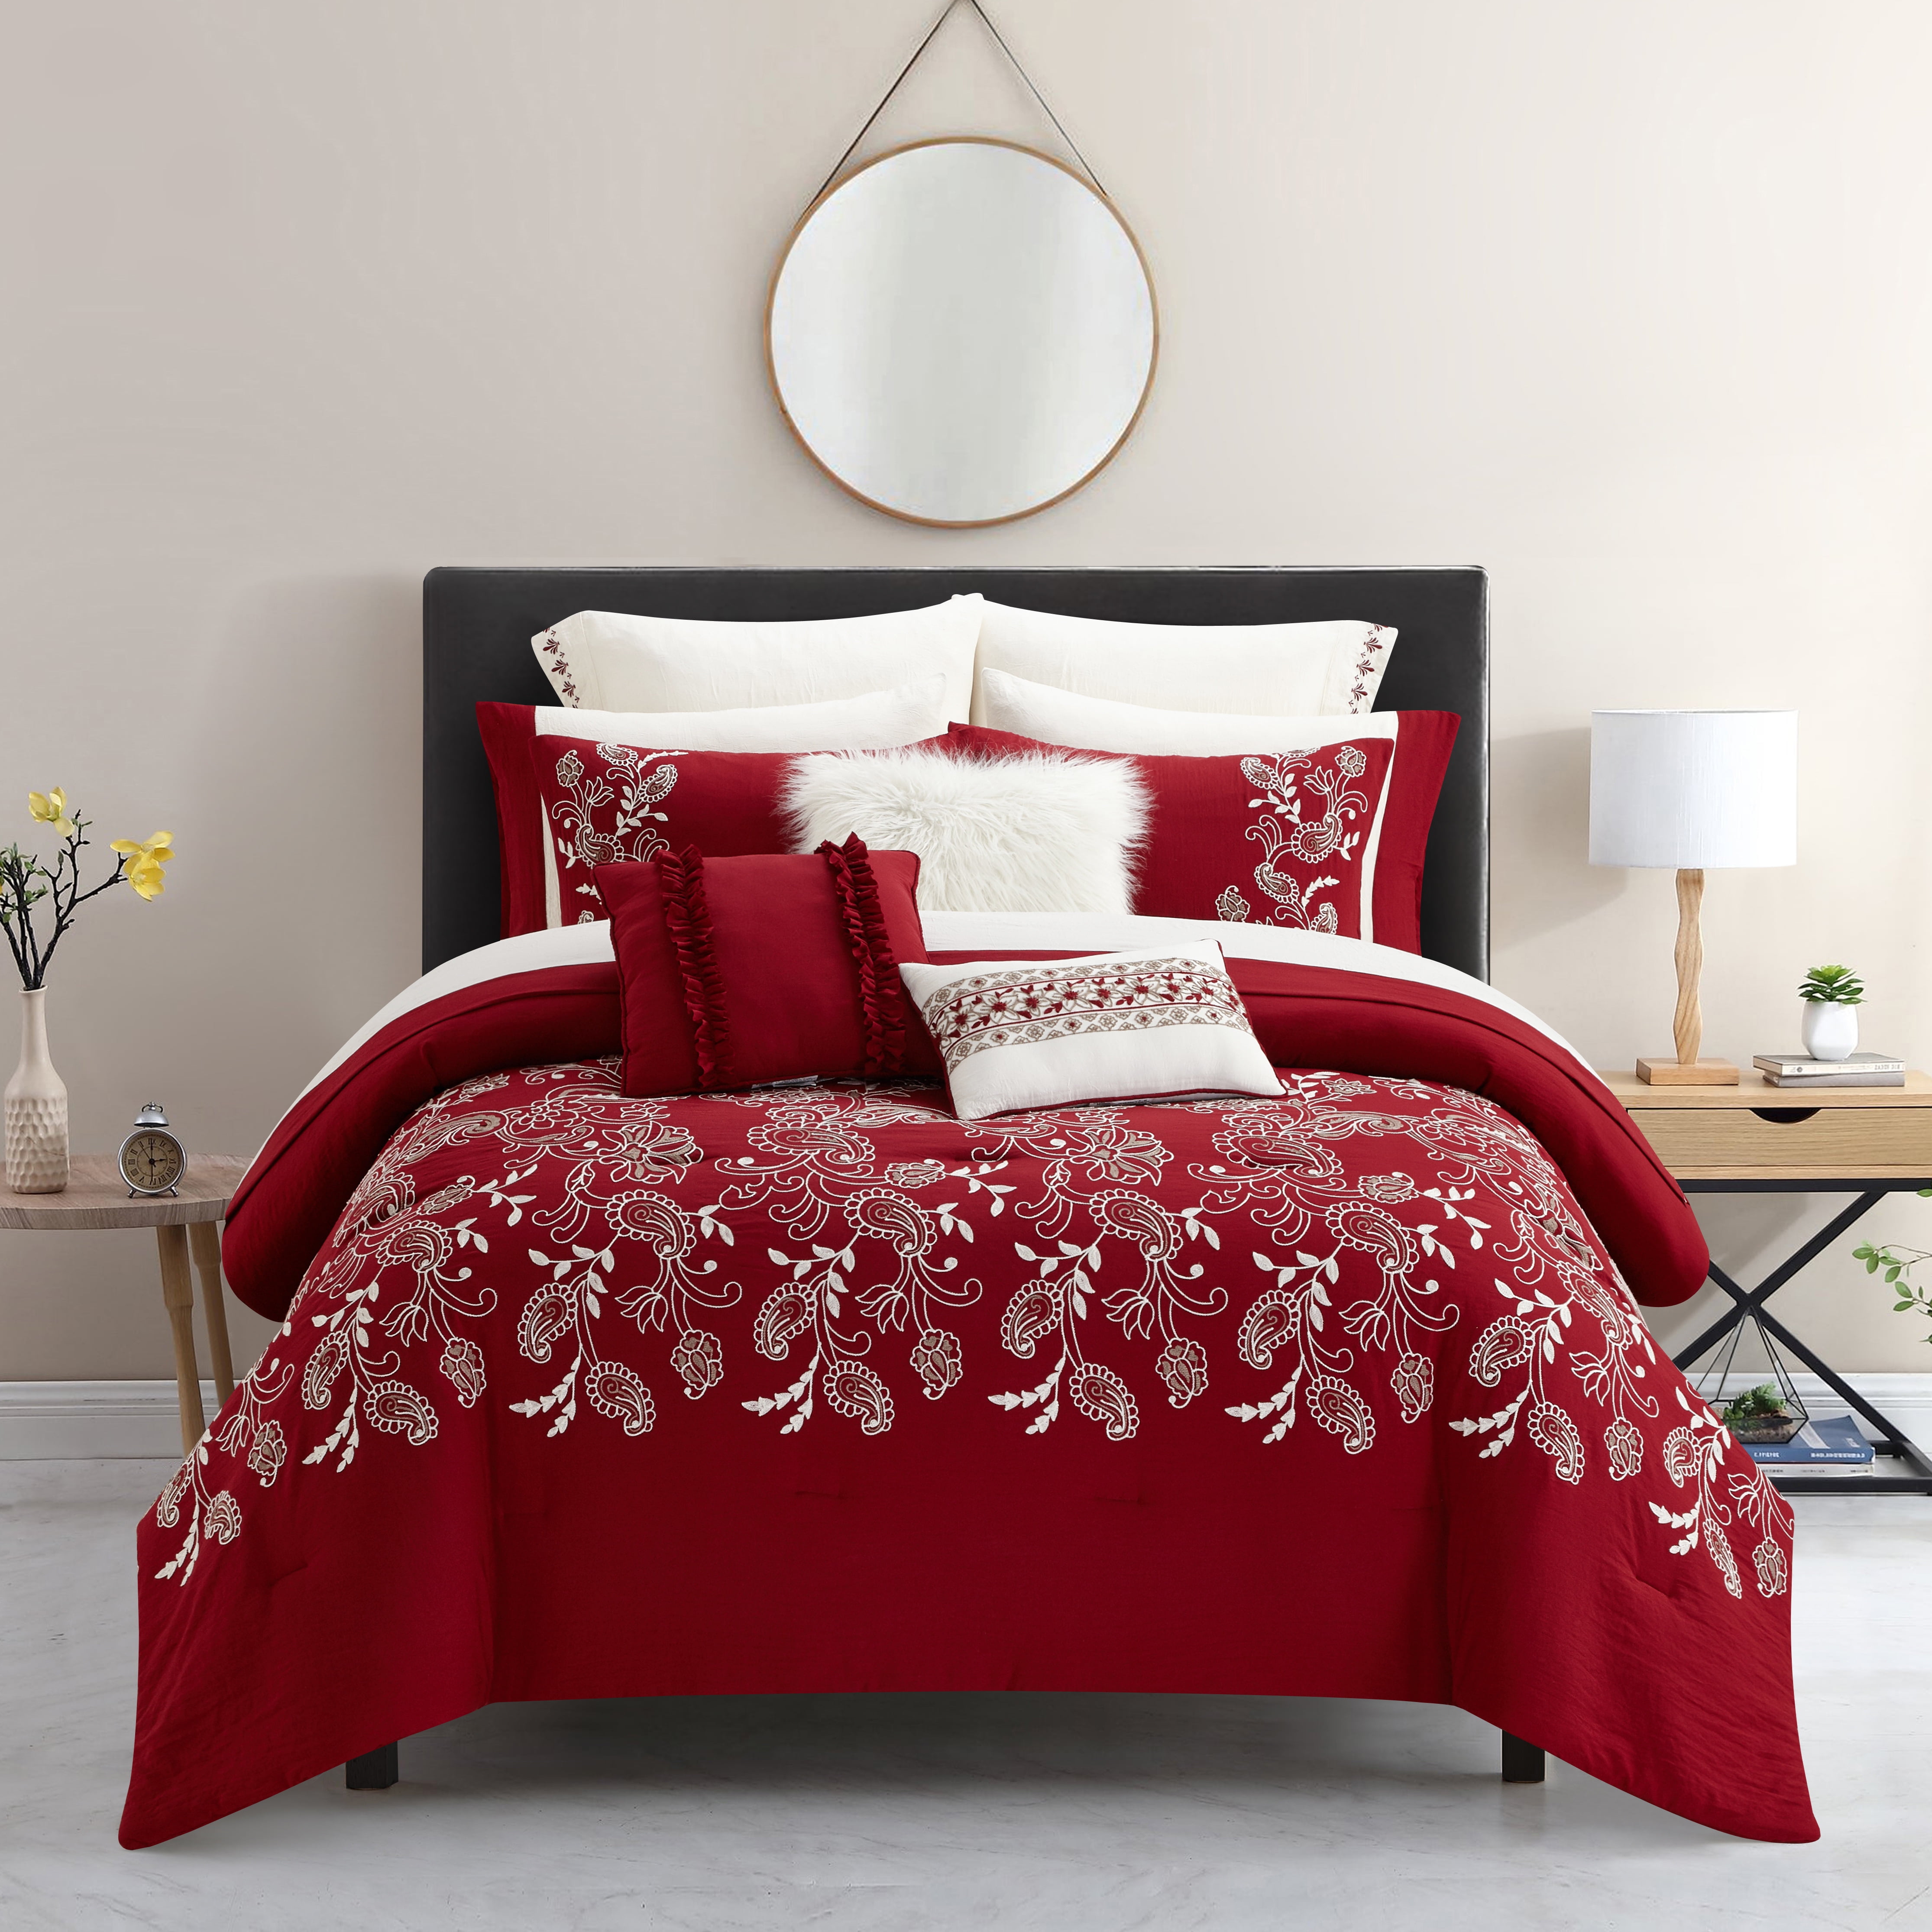 Clara Floral Red Bedspread Sheet Set New Girls Home Bedding Colcha by Intima 